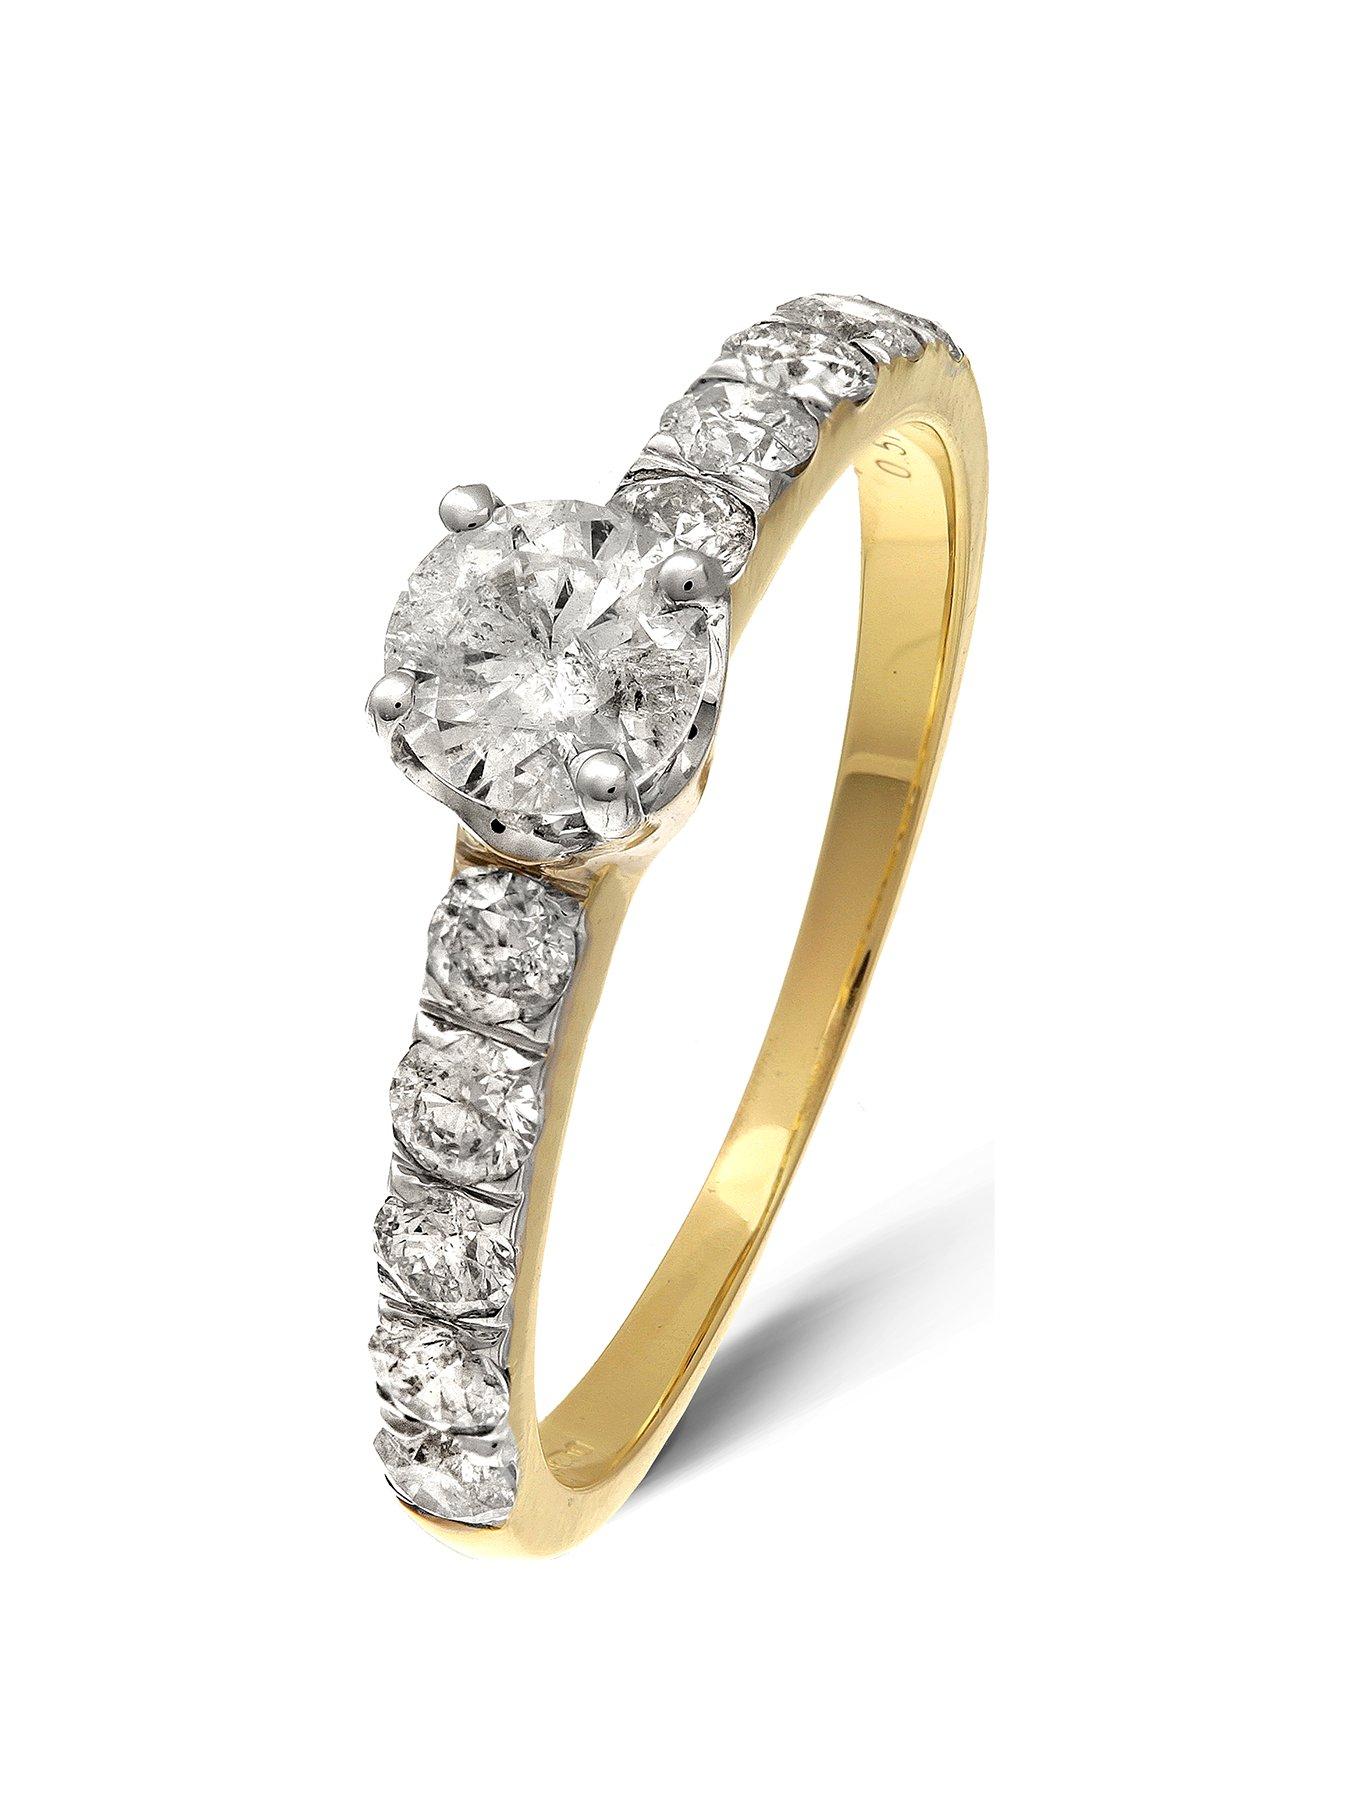 Details about   Pave Set Round Brilliant Cut Diamonds Half Eternity Ring in 9K Yellow Gold 